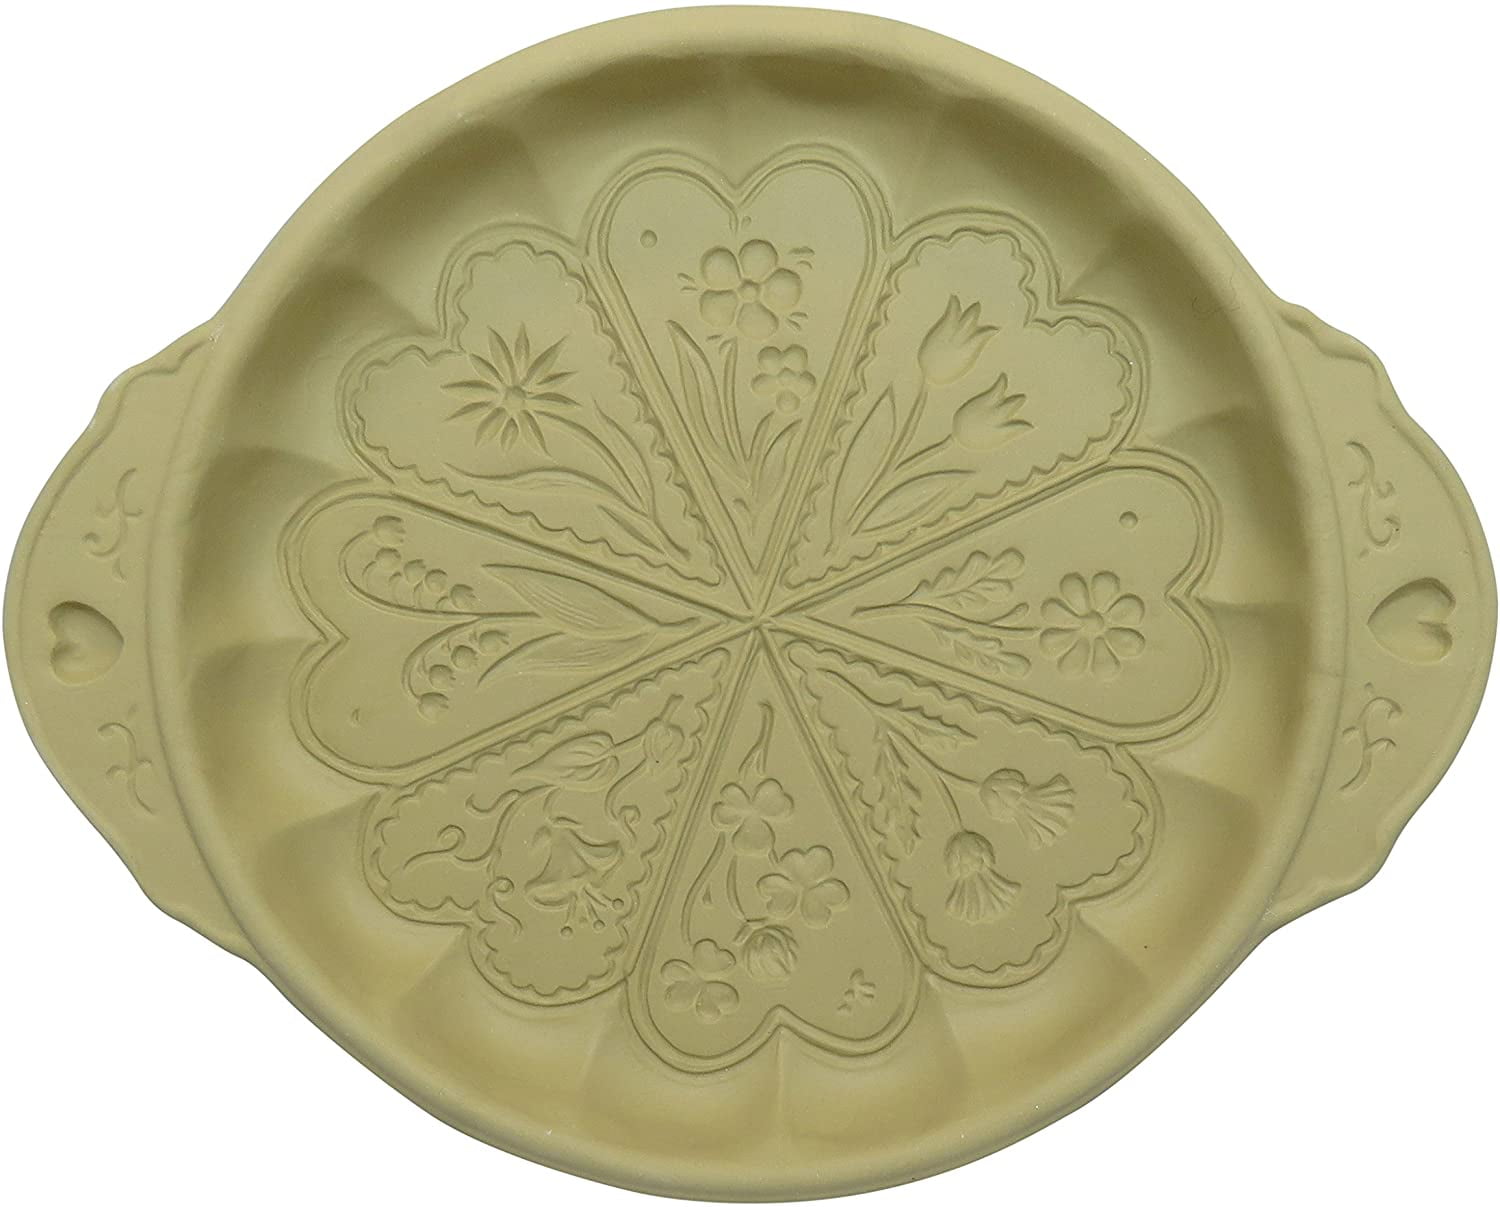 Brown Bag Design Celtic Knot Shortbread Cookie Pan, 11-1/2-Inch by 9-Inch